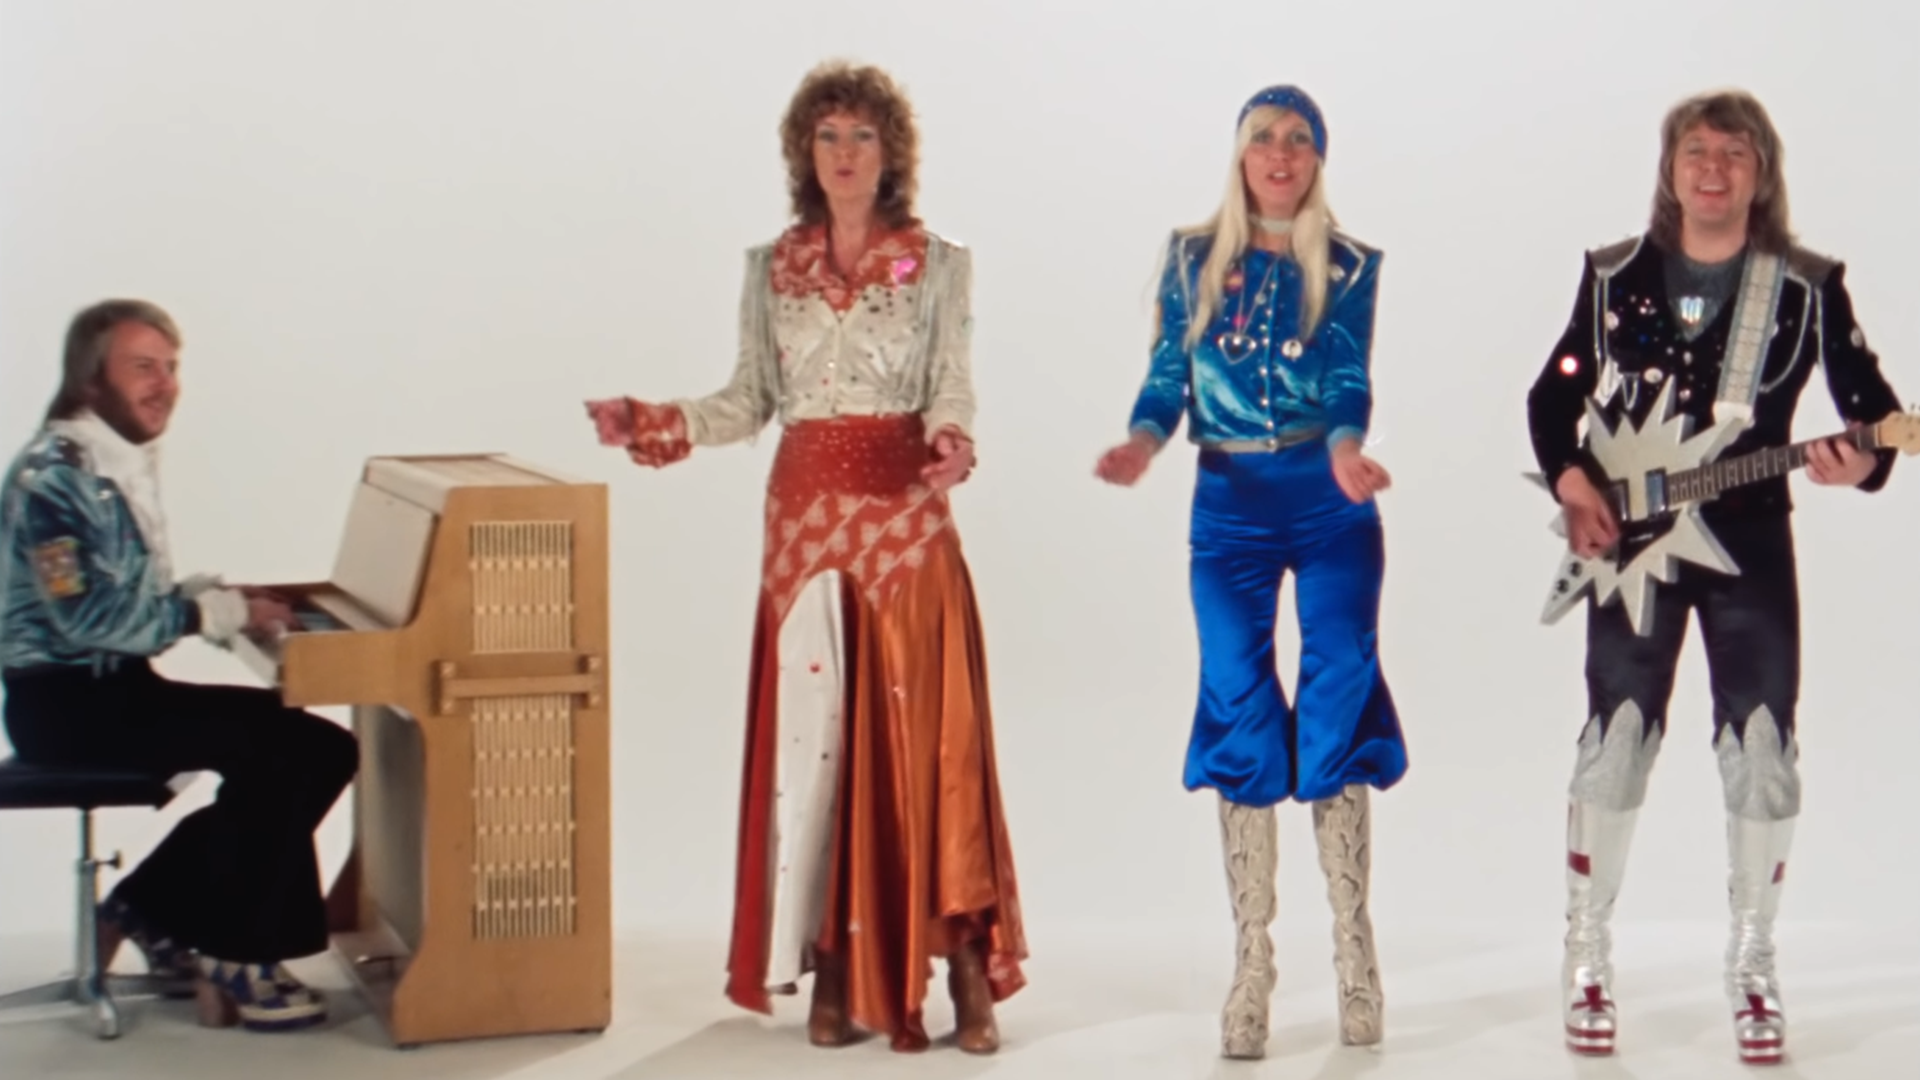 Tenerife 'Eurovision Festival' aims for world record number of Abba costumes